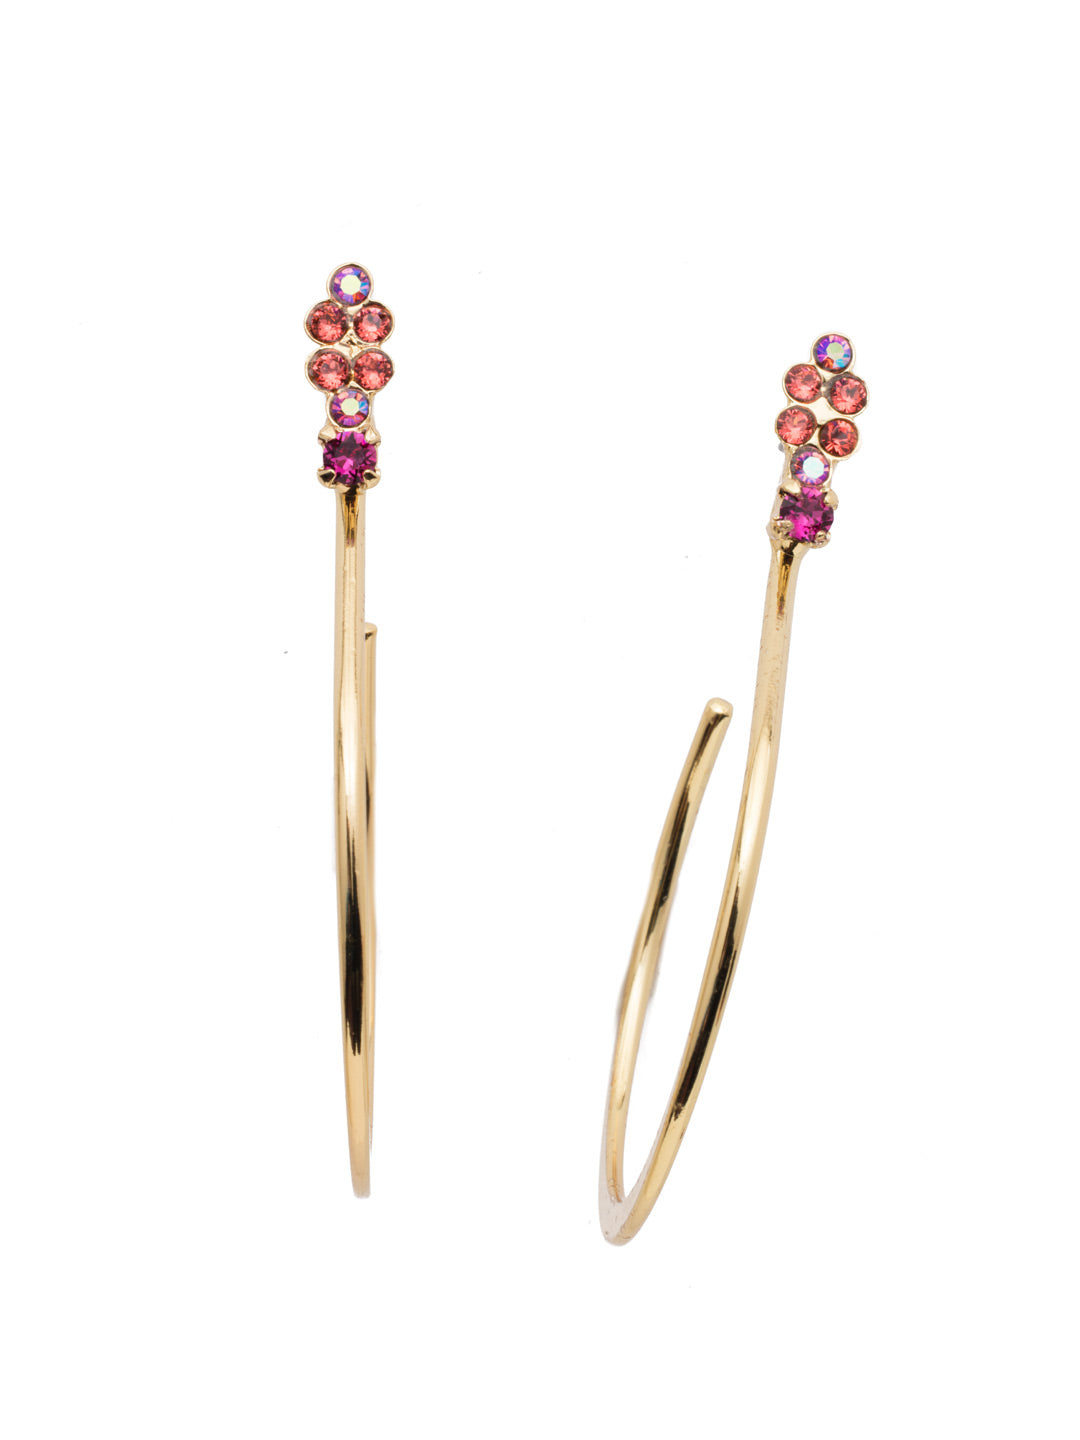 Darcie Hoop Earrings - EEN71BGBGA - The Darcie Hoop Statement Earrings are stylish and simple, offering up a classic hoop hook and just a touch of crystal sparkle at the top. From Sorrelli's Begonia collection in our Bright Gold-tone finish.